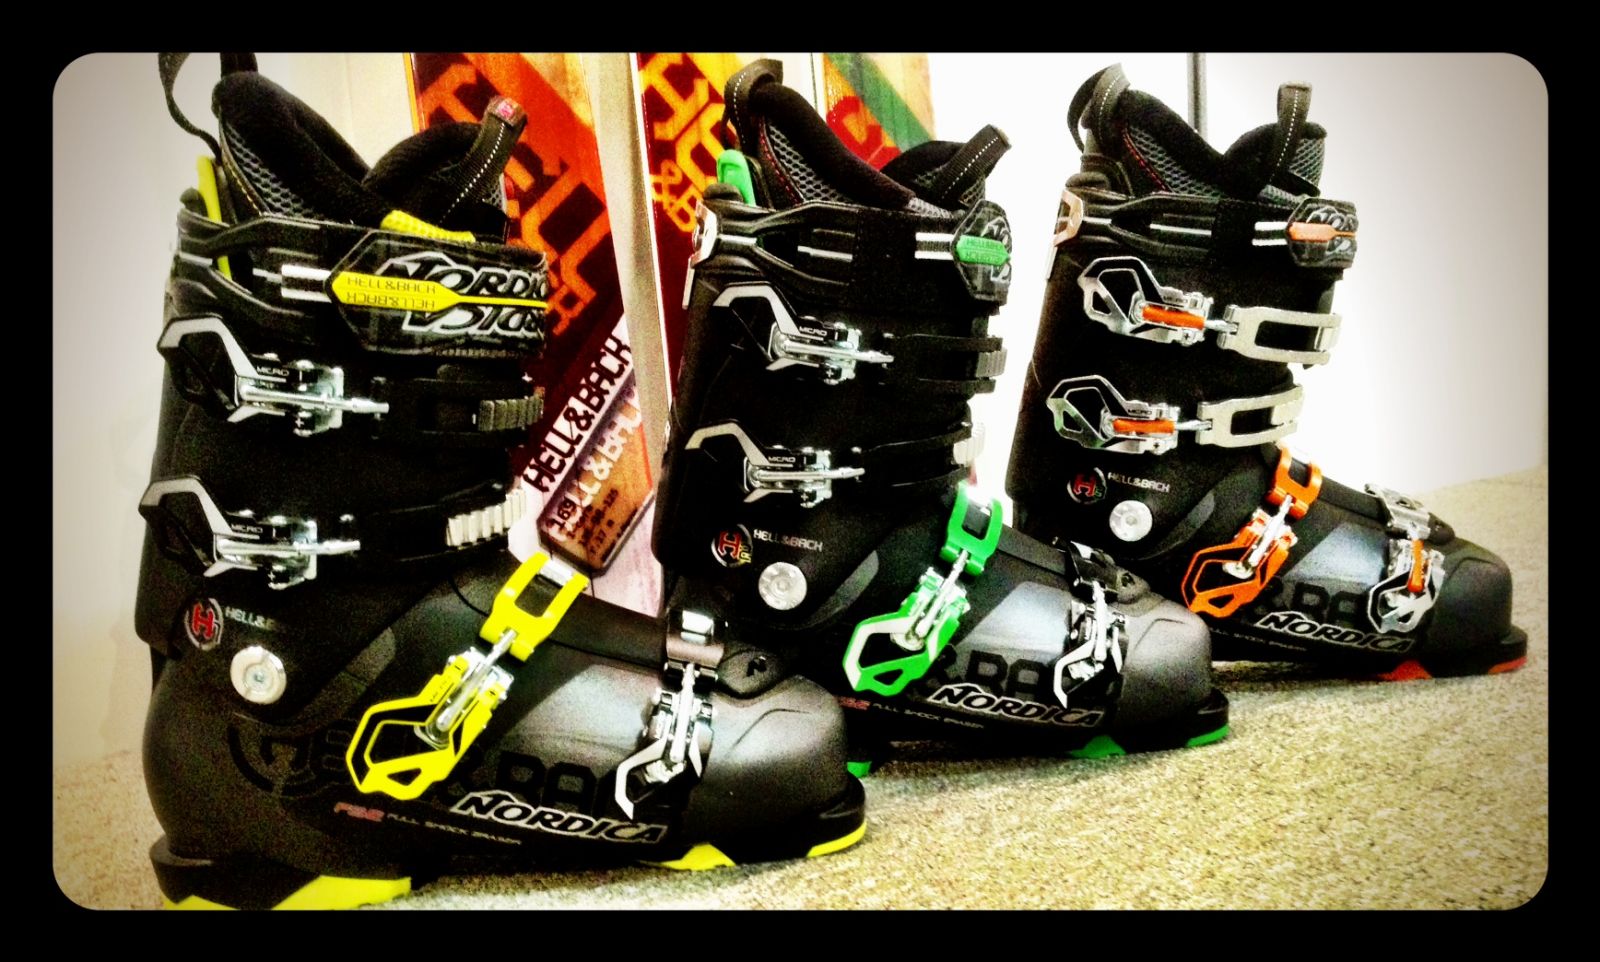 Nordica Hell and Back Ski Boots, Ski Review